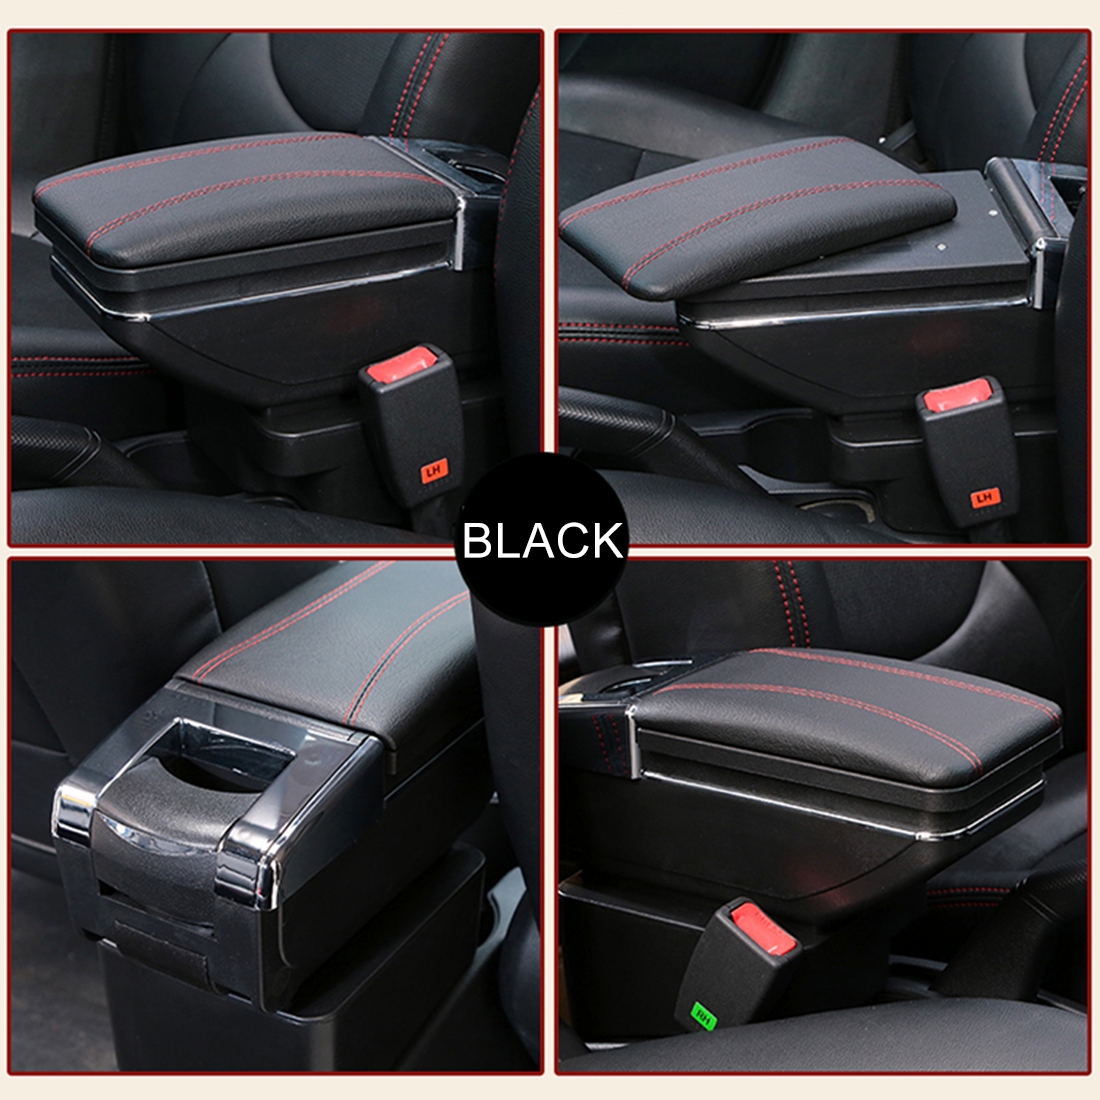 Car ABS + Leather Wrapped Armrest Box Storage Organizer Auto Cup Holder Accessories for KIA K2 2015 / 2017 Year (Black)